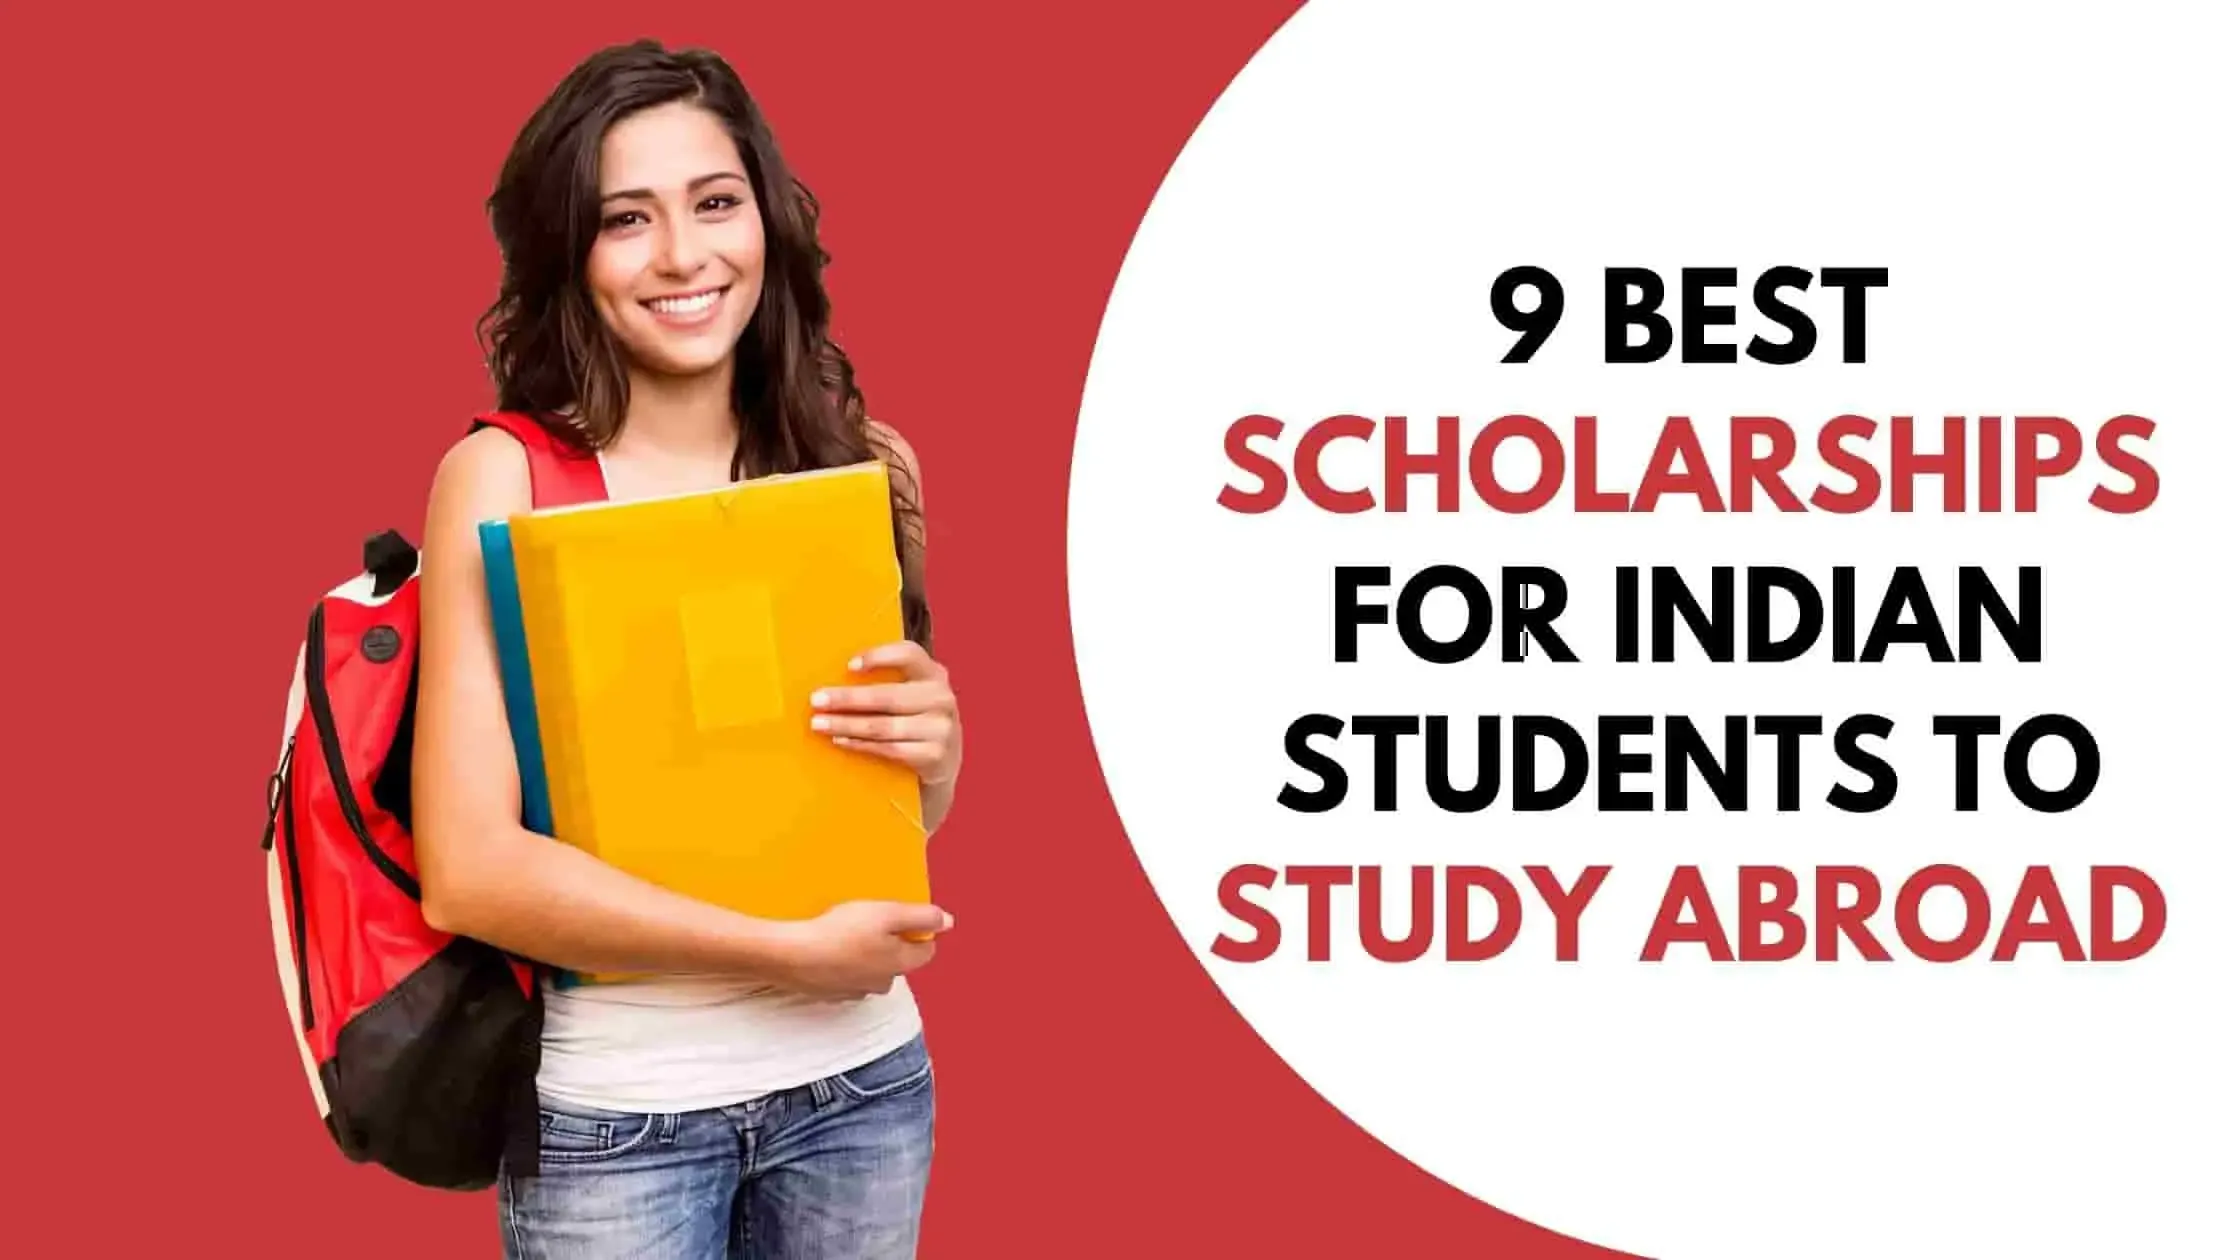 Scholarship for Indian Students